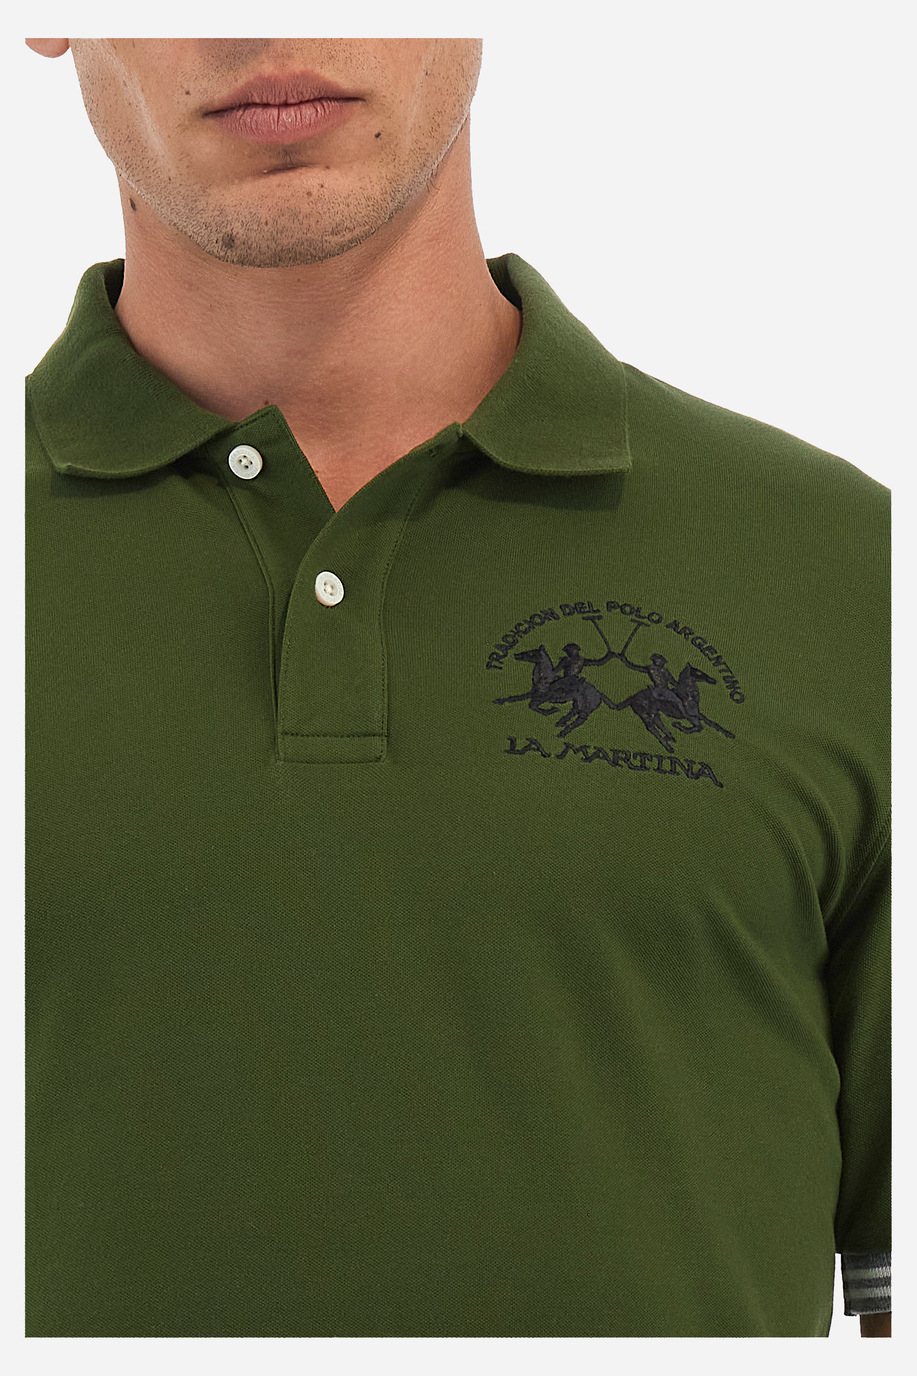 Men's polo shirt in a regular fit - Waddell - Essential | La Martina - Official Online Shop